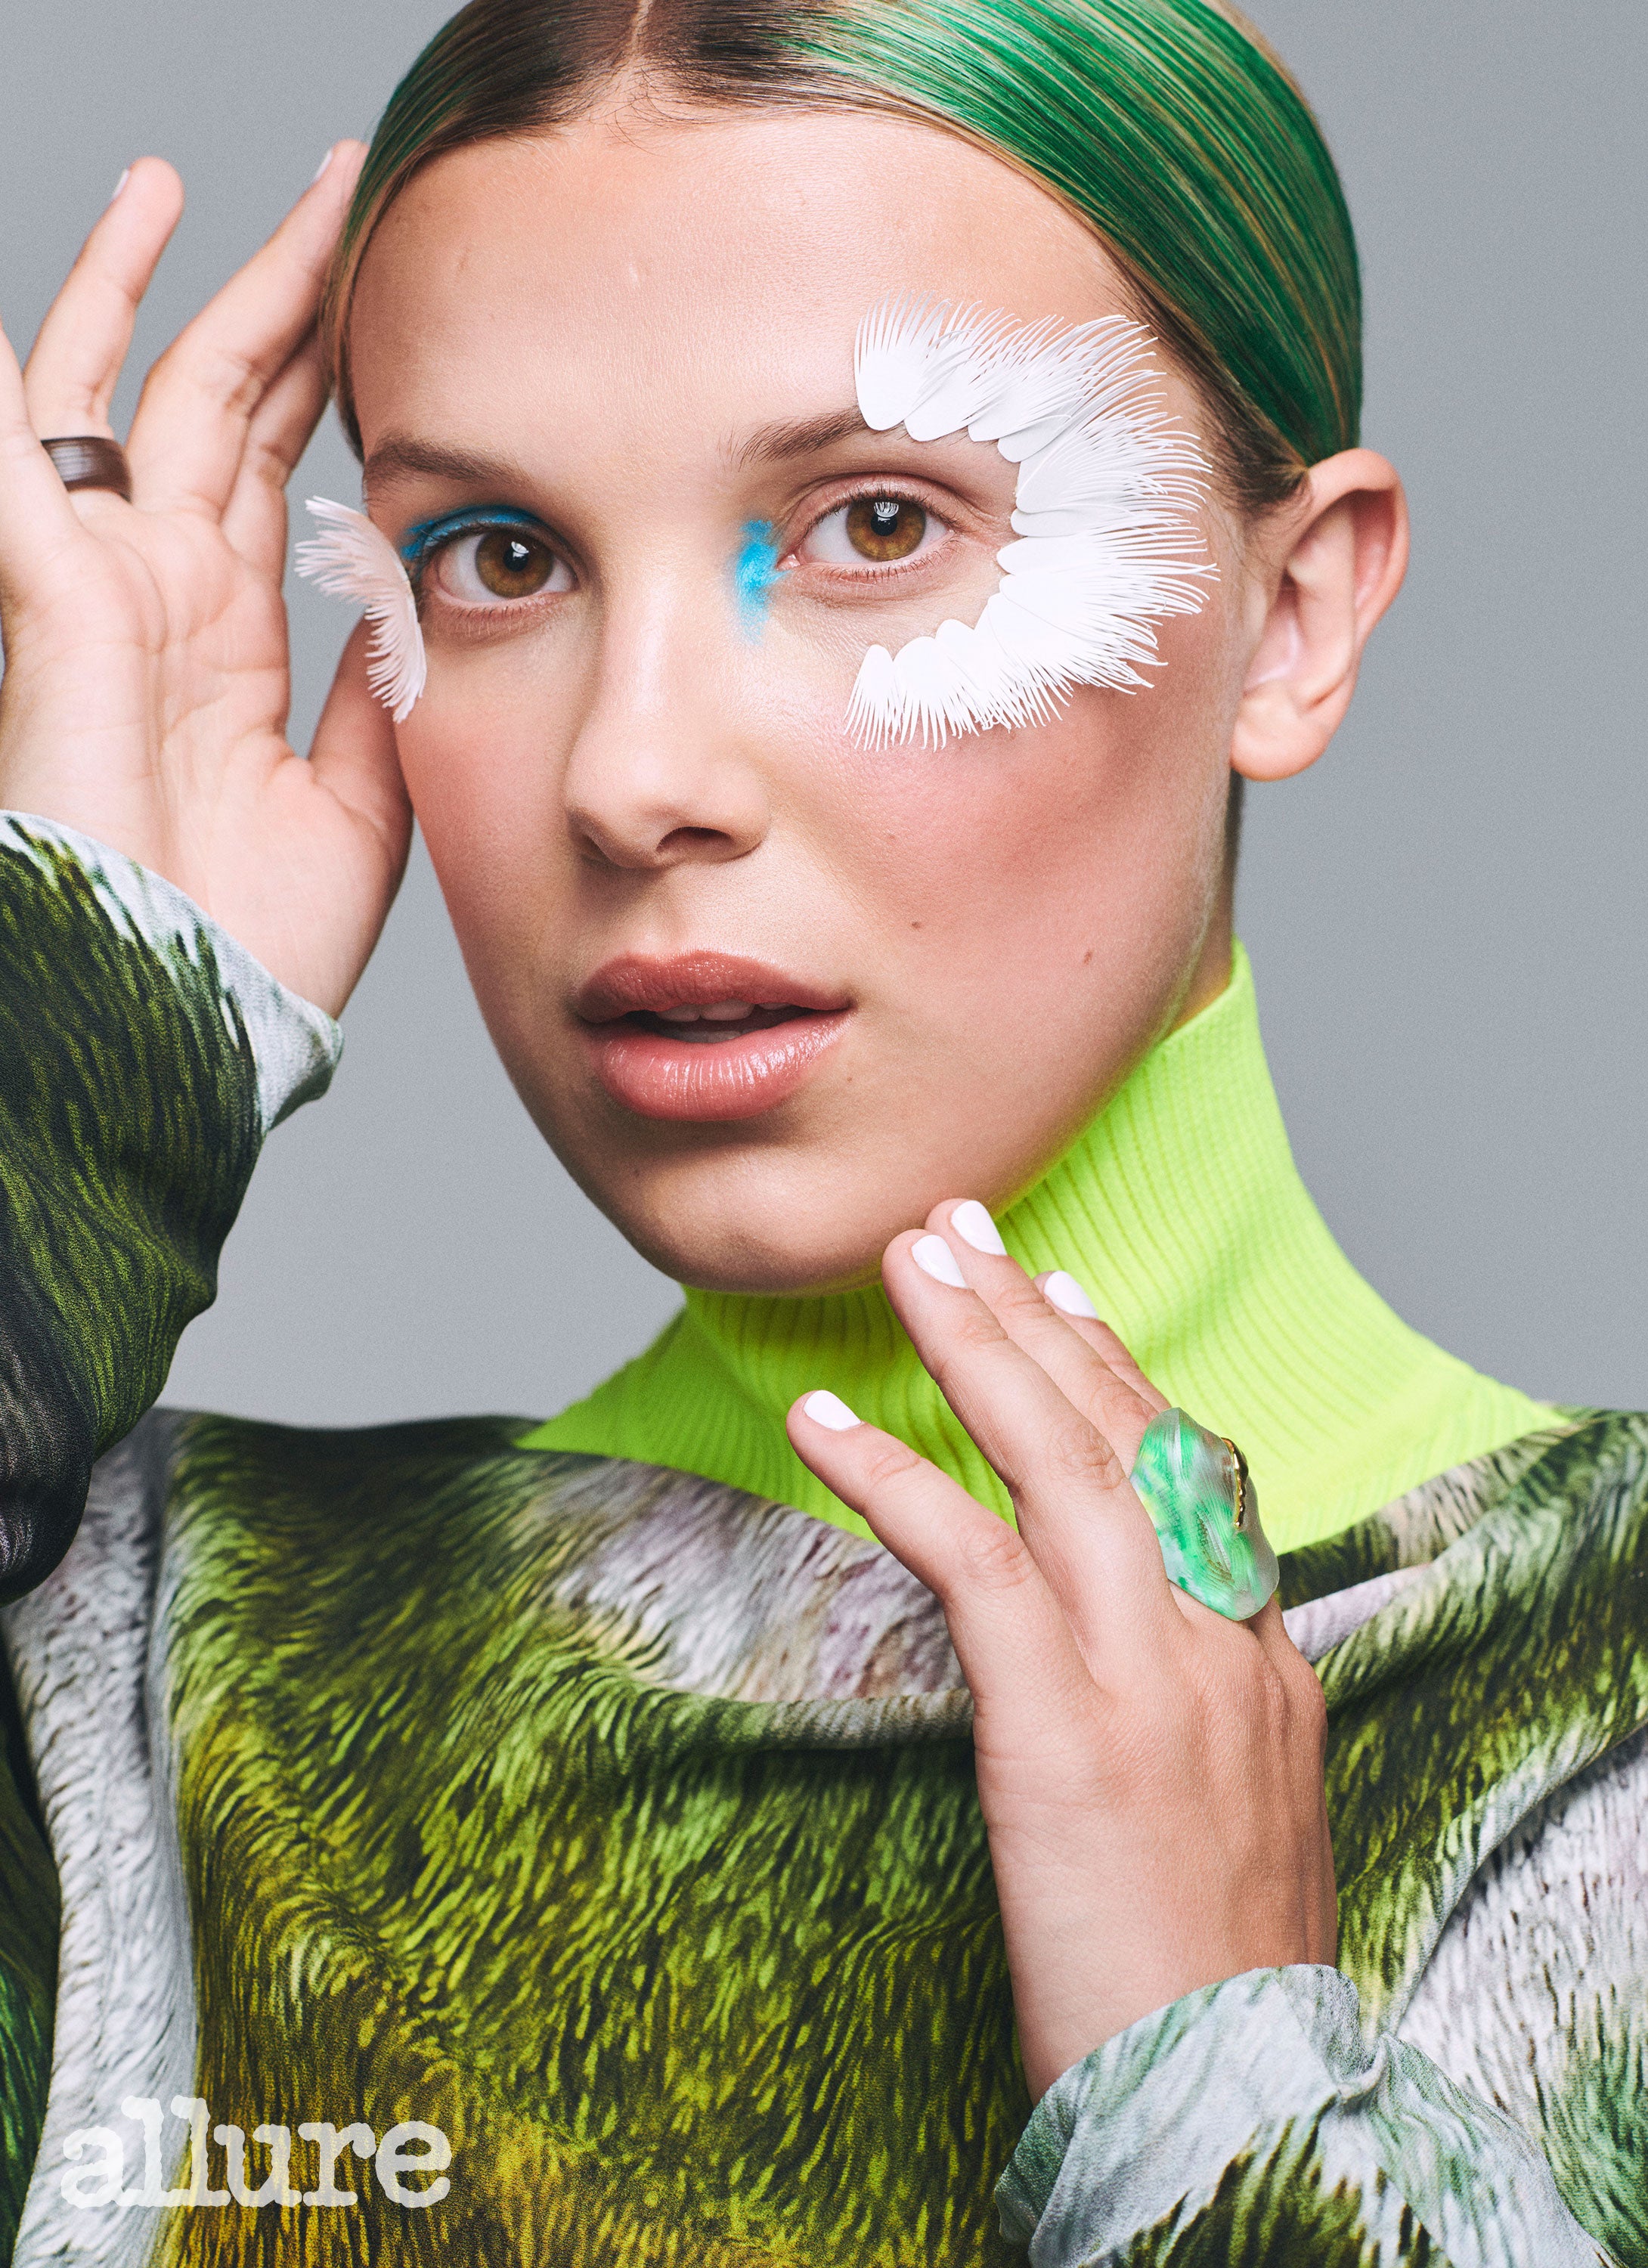 Why Millie Bobby Brown's Cheer-Inspired Look Is Her Best Yet